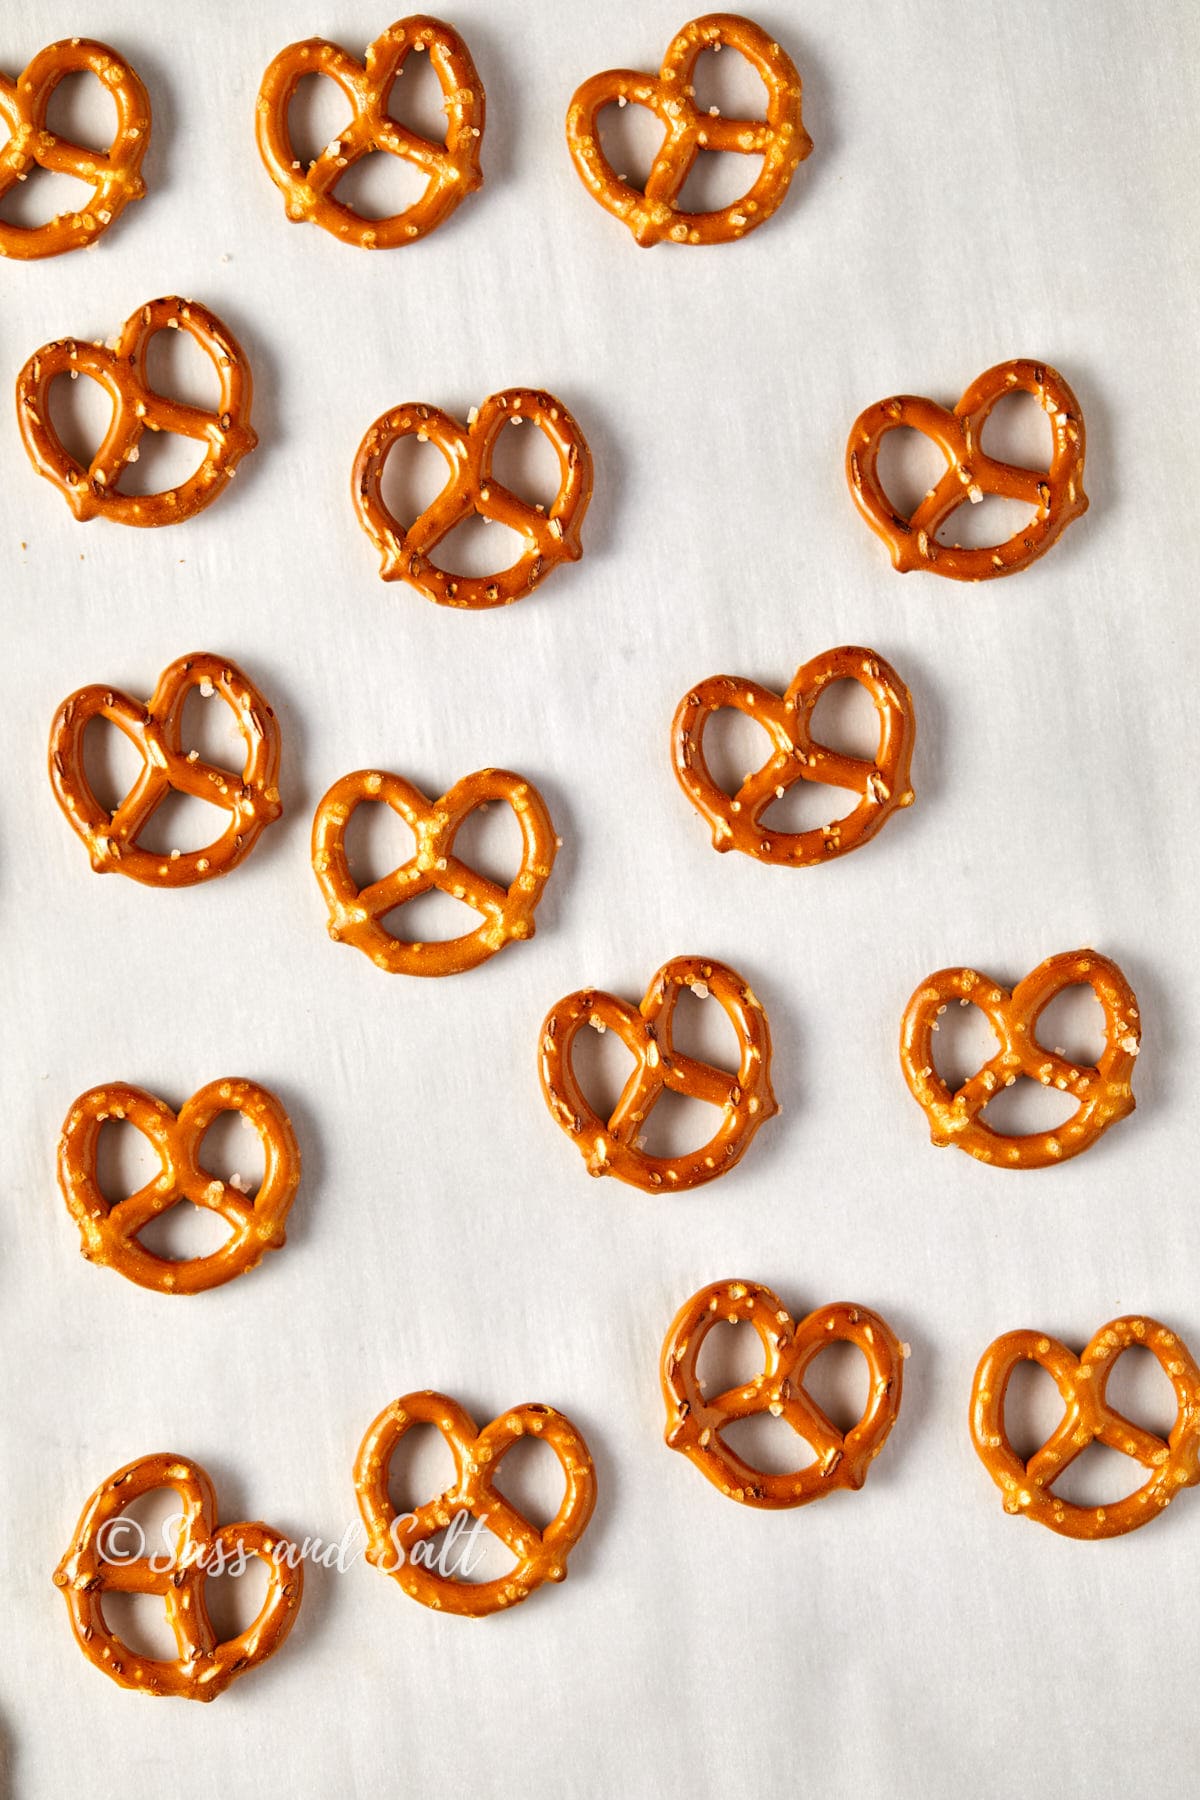 Overhead view of plain pretzels on a counter.